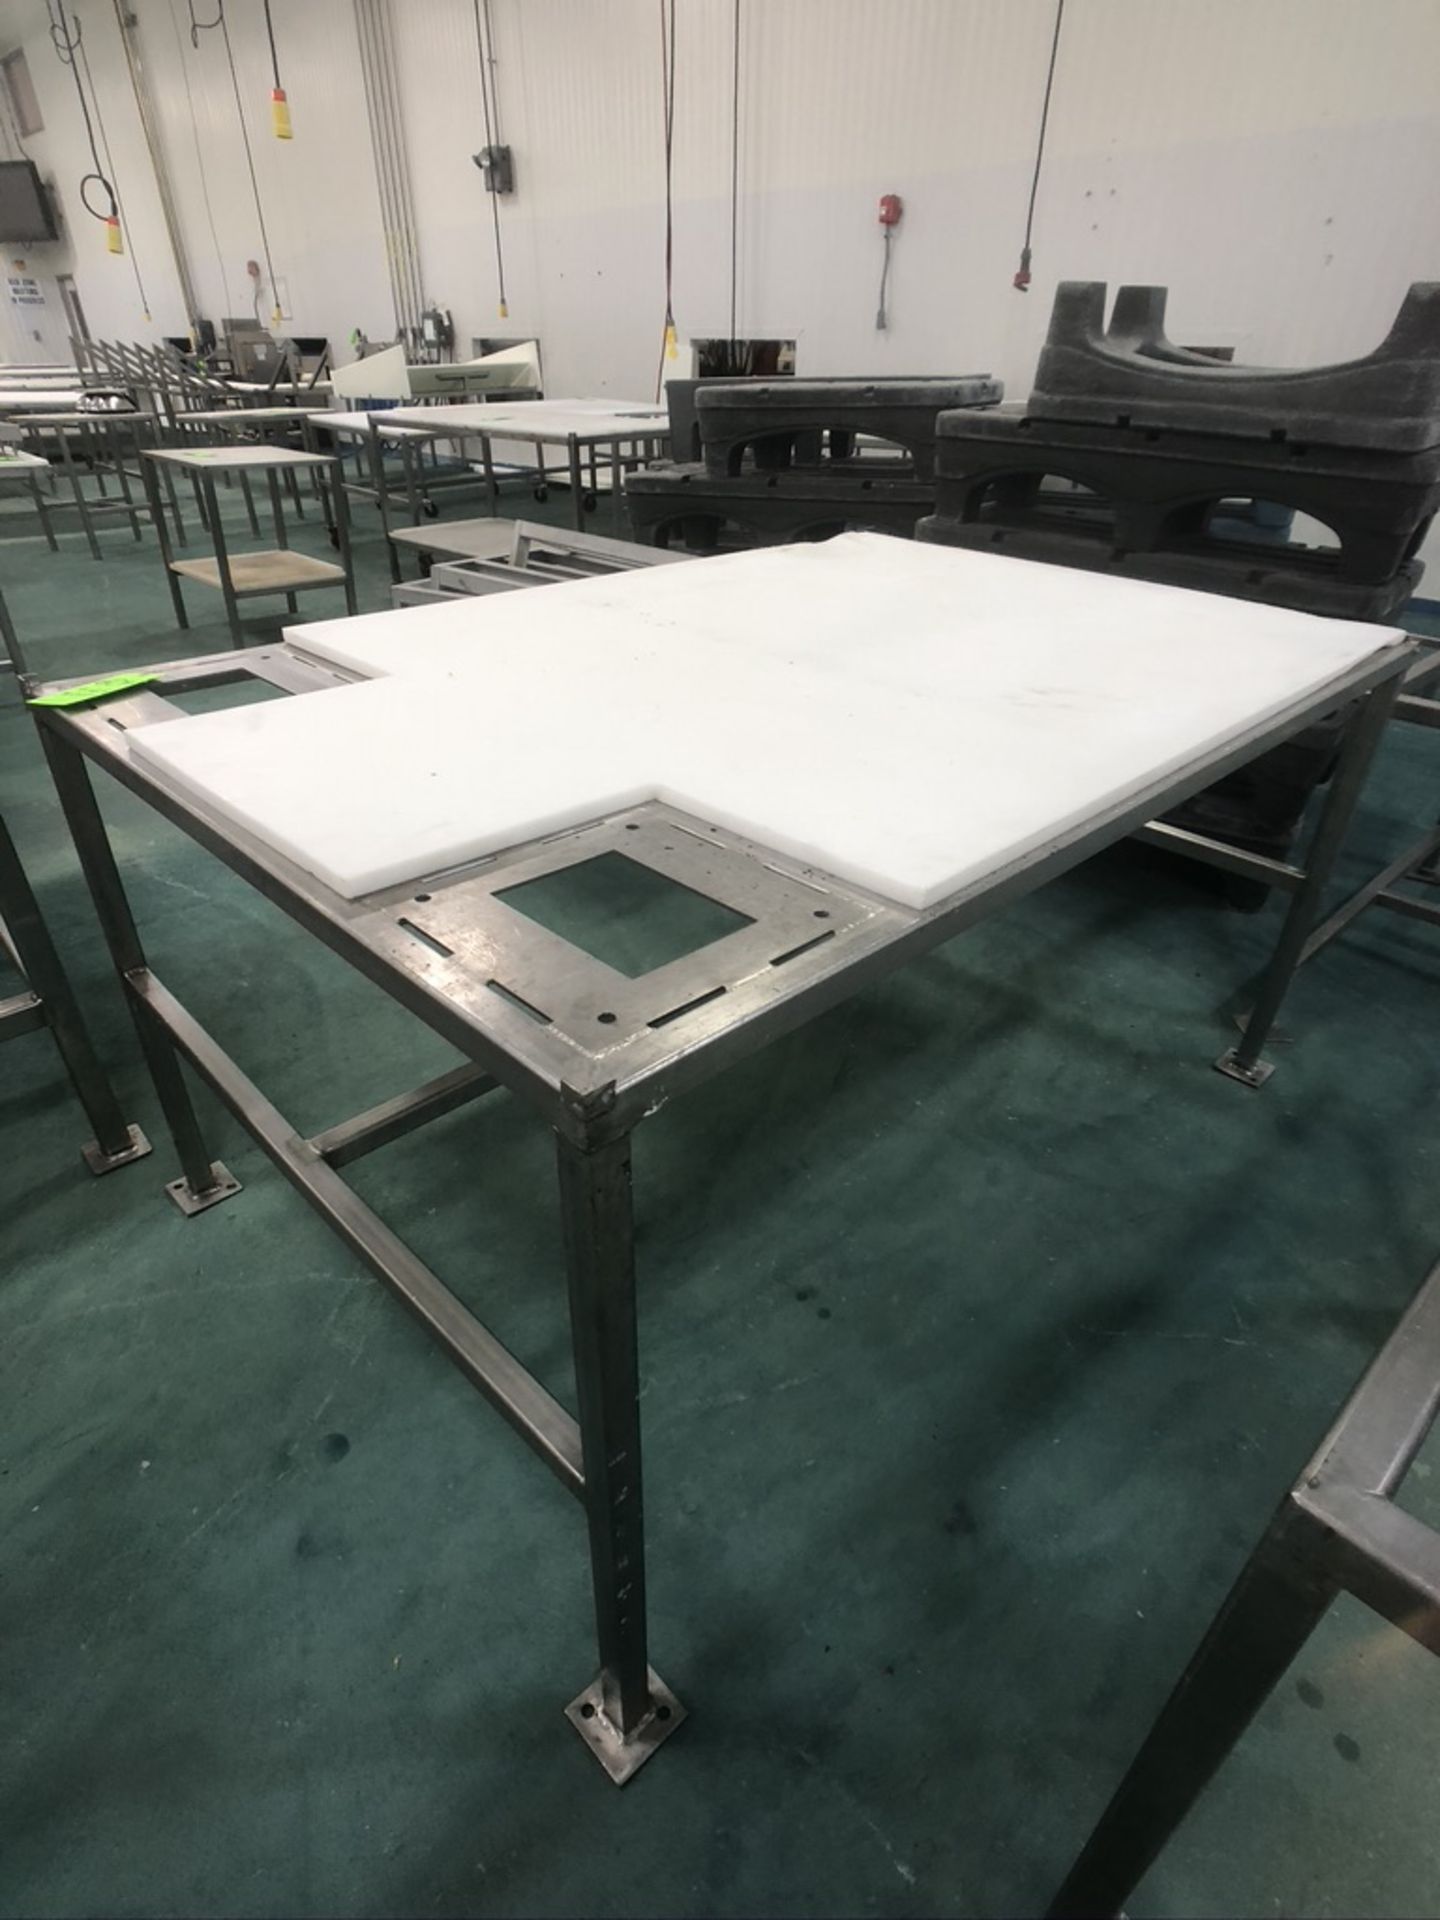 S/S TABLE WITH UMHW CUTTING BOARD TOP, APPX DIM. LWH'' 70 X 48 X 36 - Image 2 of 2